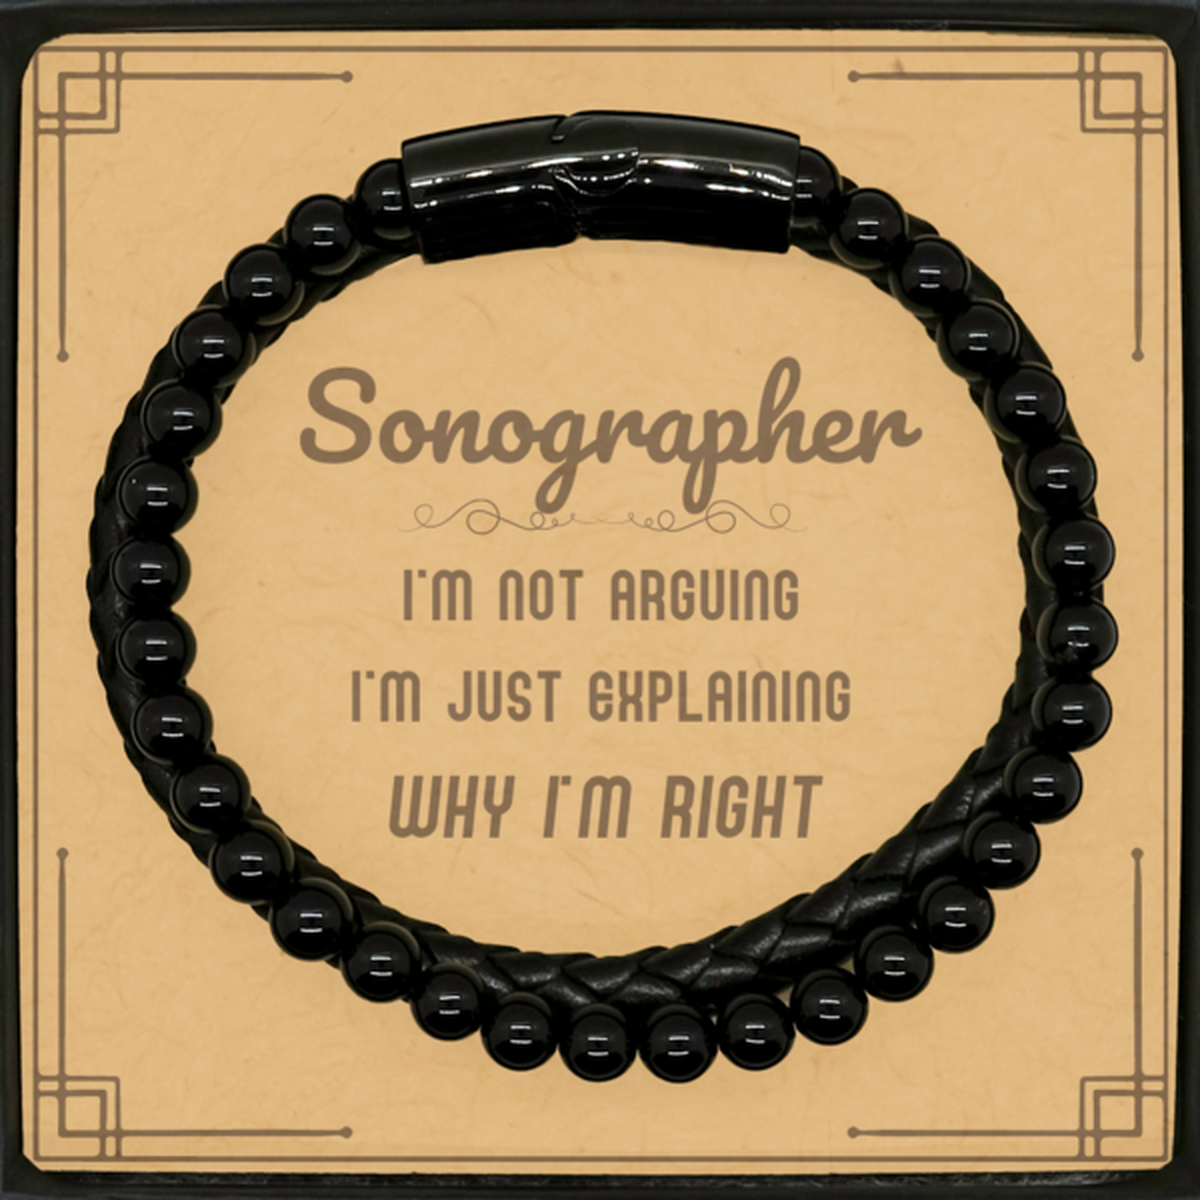 Sonographer I'm not Arguing. I'm Just Explaining Why I'm RIGHT Stone Leather Bracelets, Funny Saying Quote Sonographer Gifts For Sonographer Message Card Graduation Birthday Christmas Gifts for Men Women Coworker